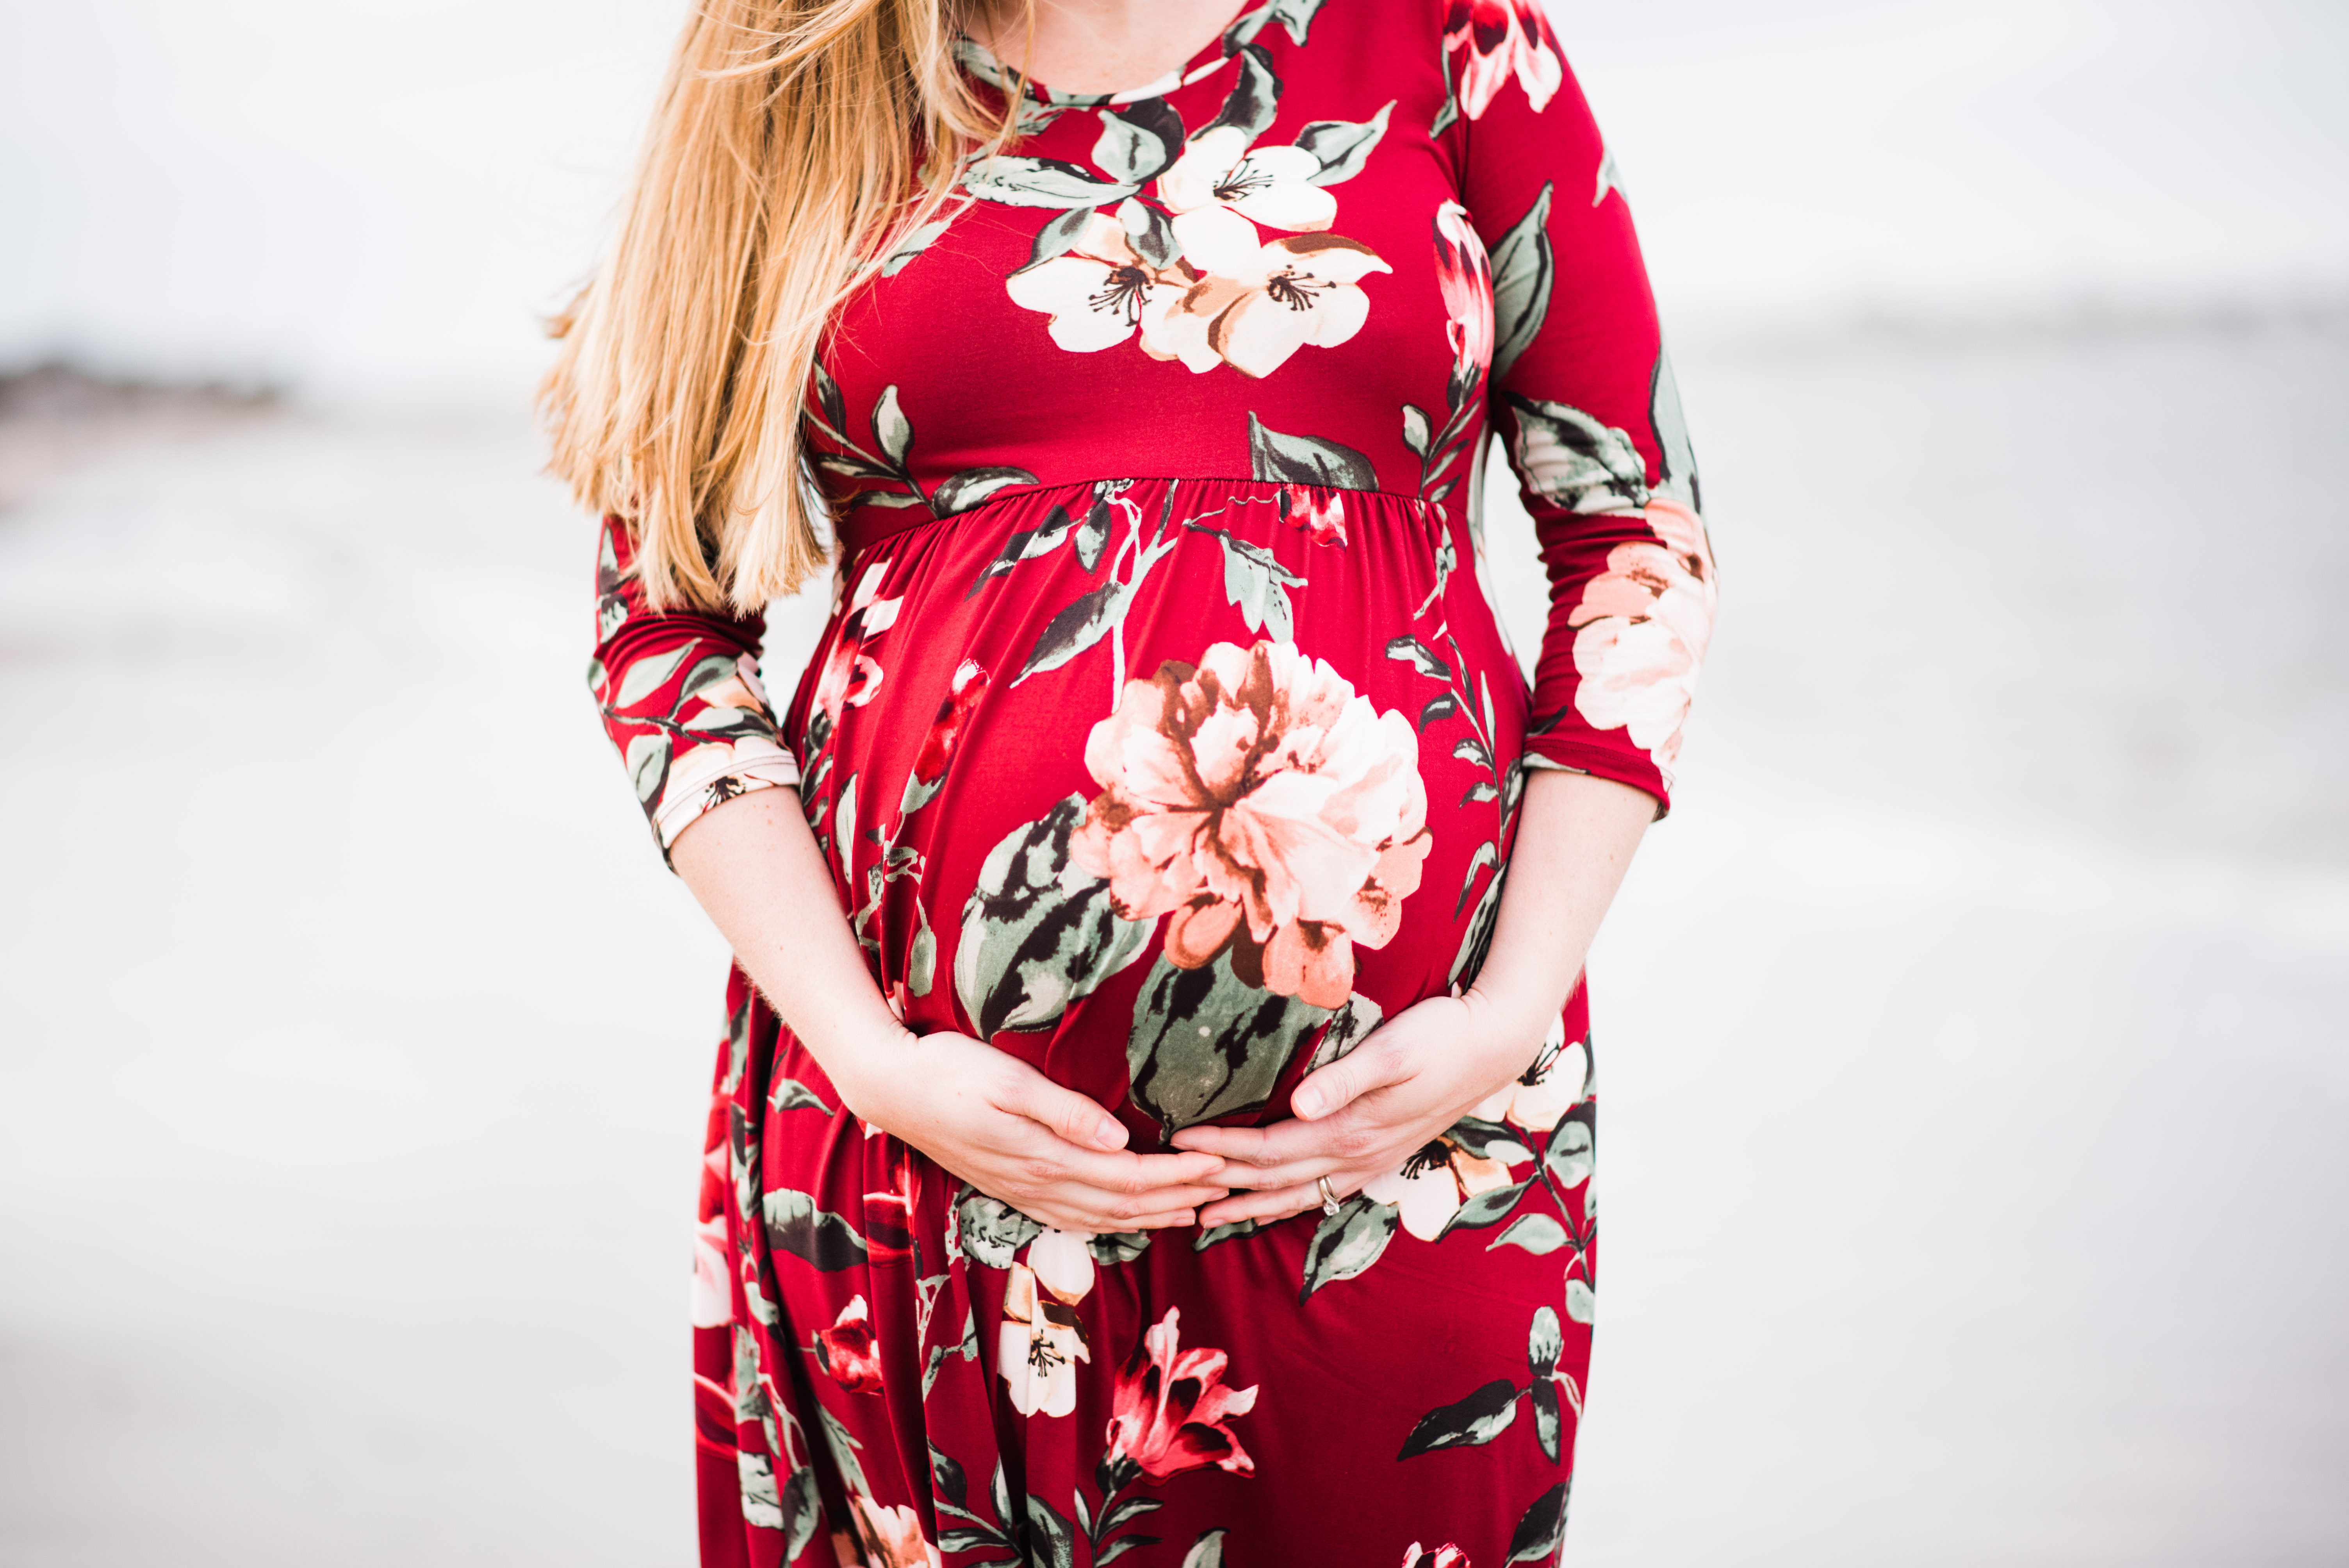 Red Maternity Dress at beach maternity session